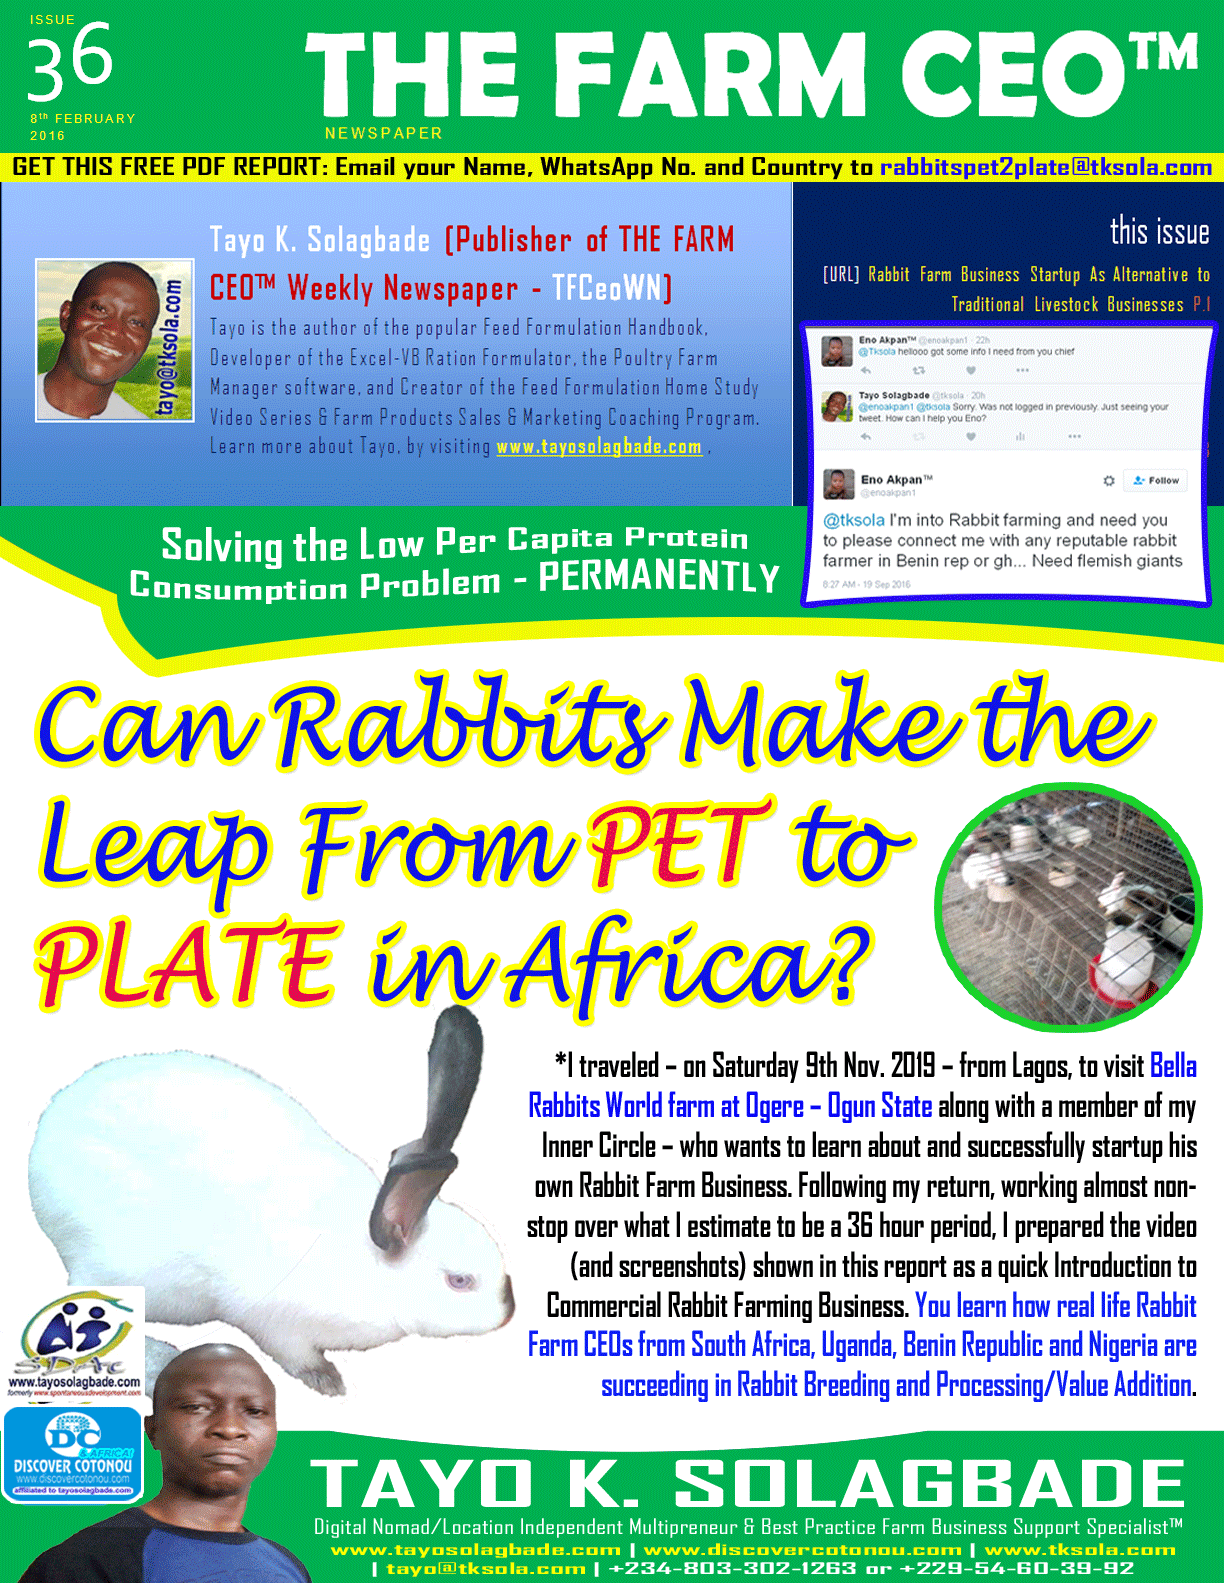 COVER IMAGE - Can Rabbits Make the Leap From PET to PLATE in Africa? - Email your Name, WhatsApp No. and Country to rabbitspet2plate@tksola.com and I'll send the download link to you via your email inbox and also on WhatsApp.